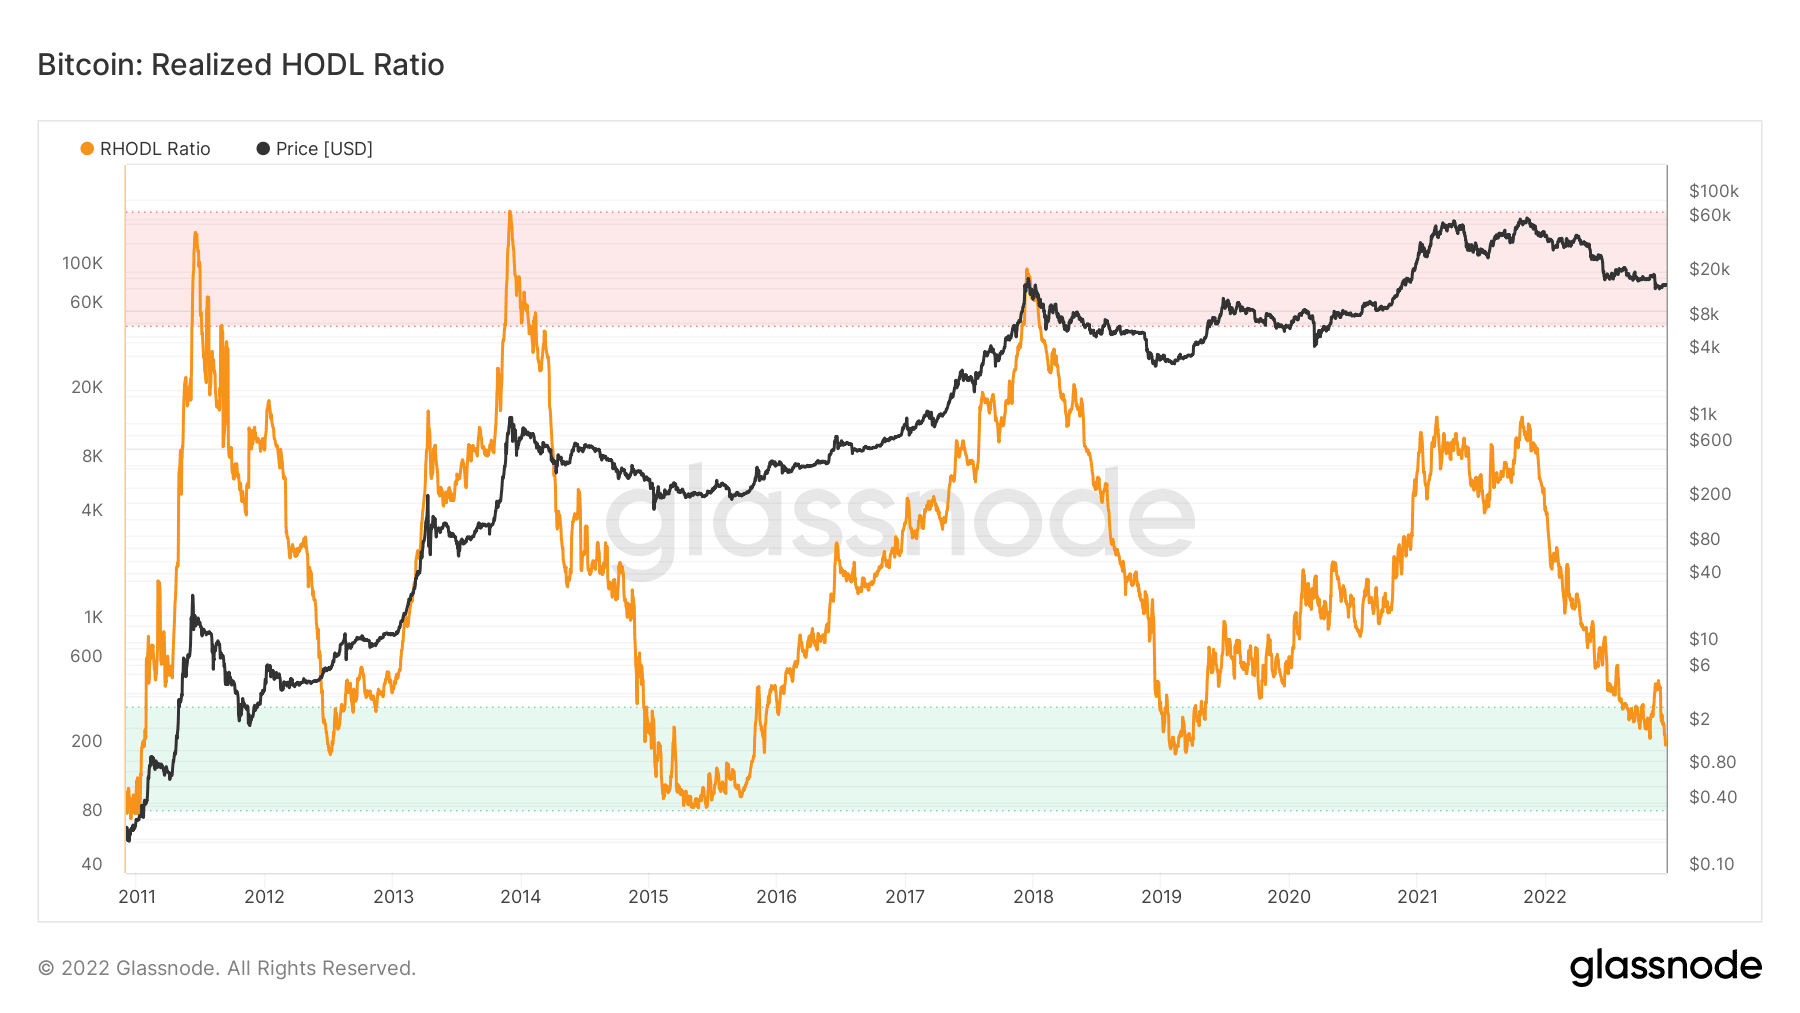 HODL ratio realized by Bitcoin 